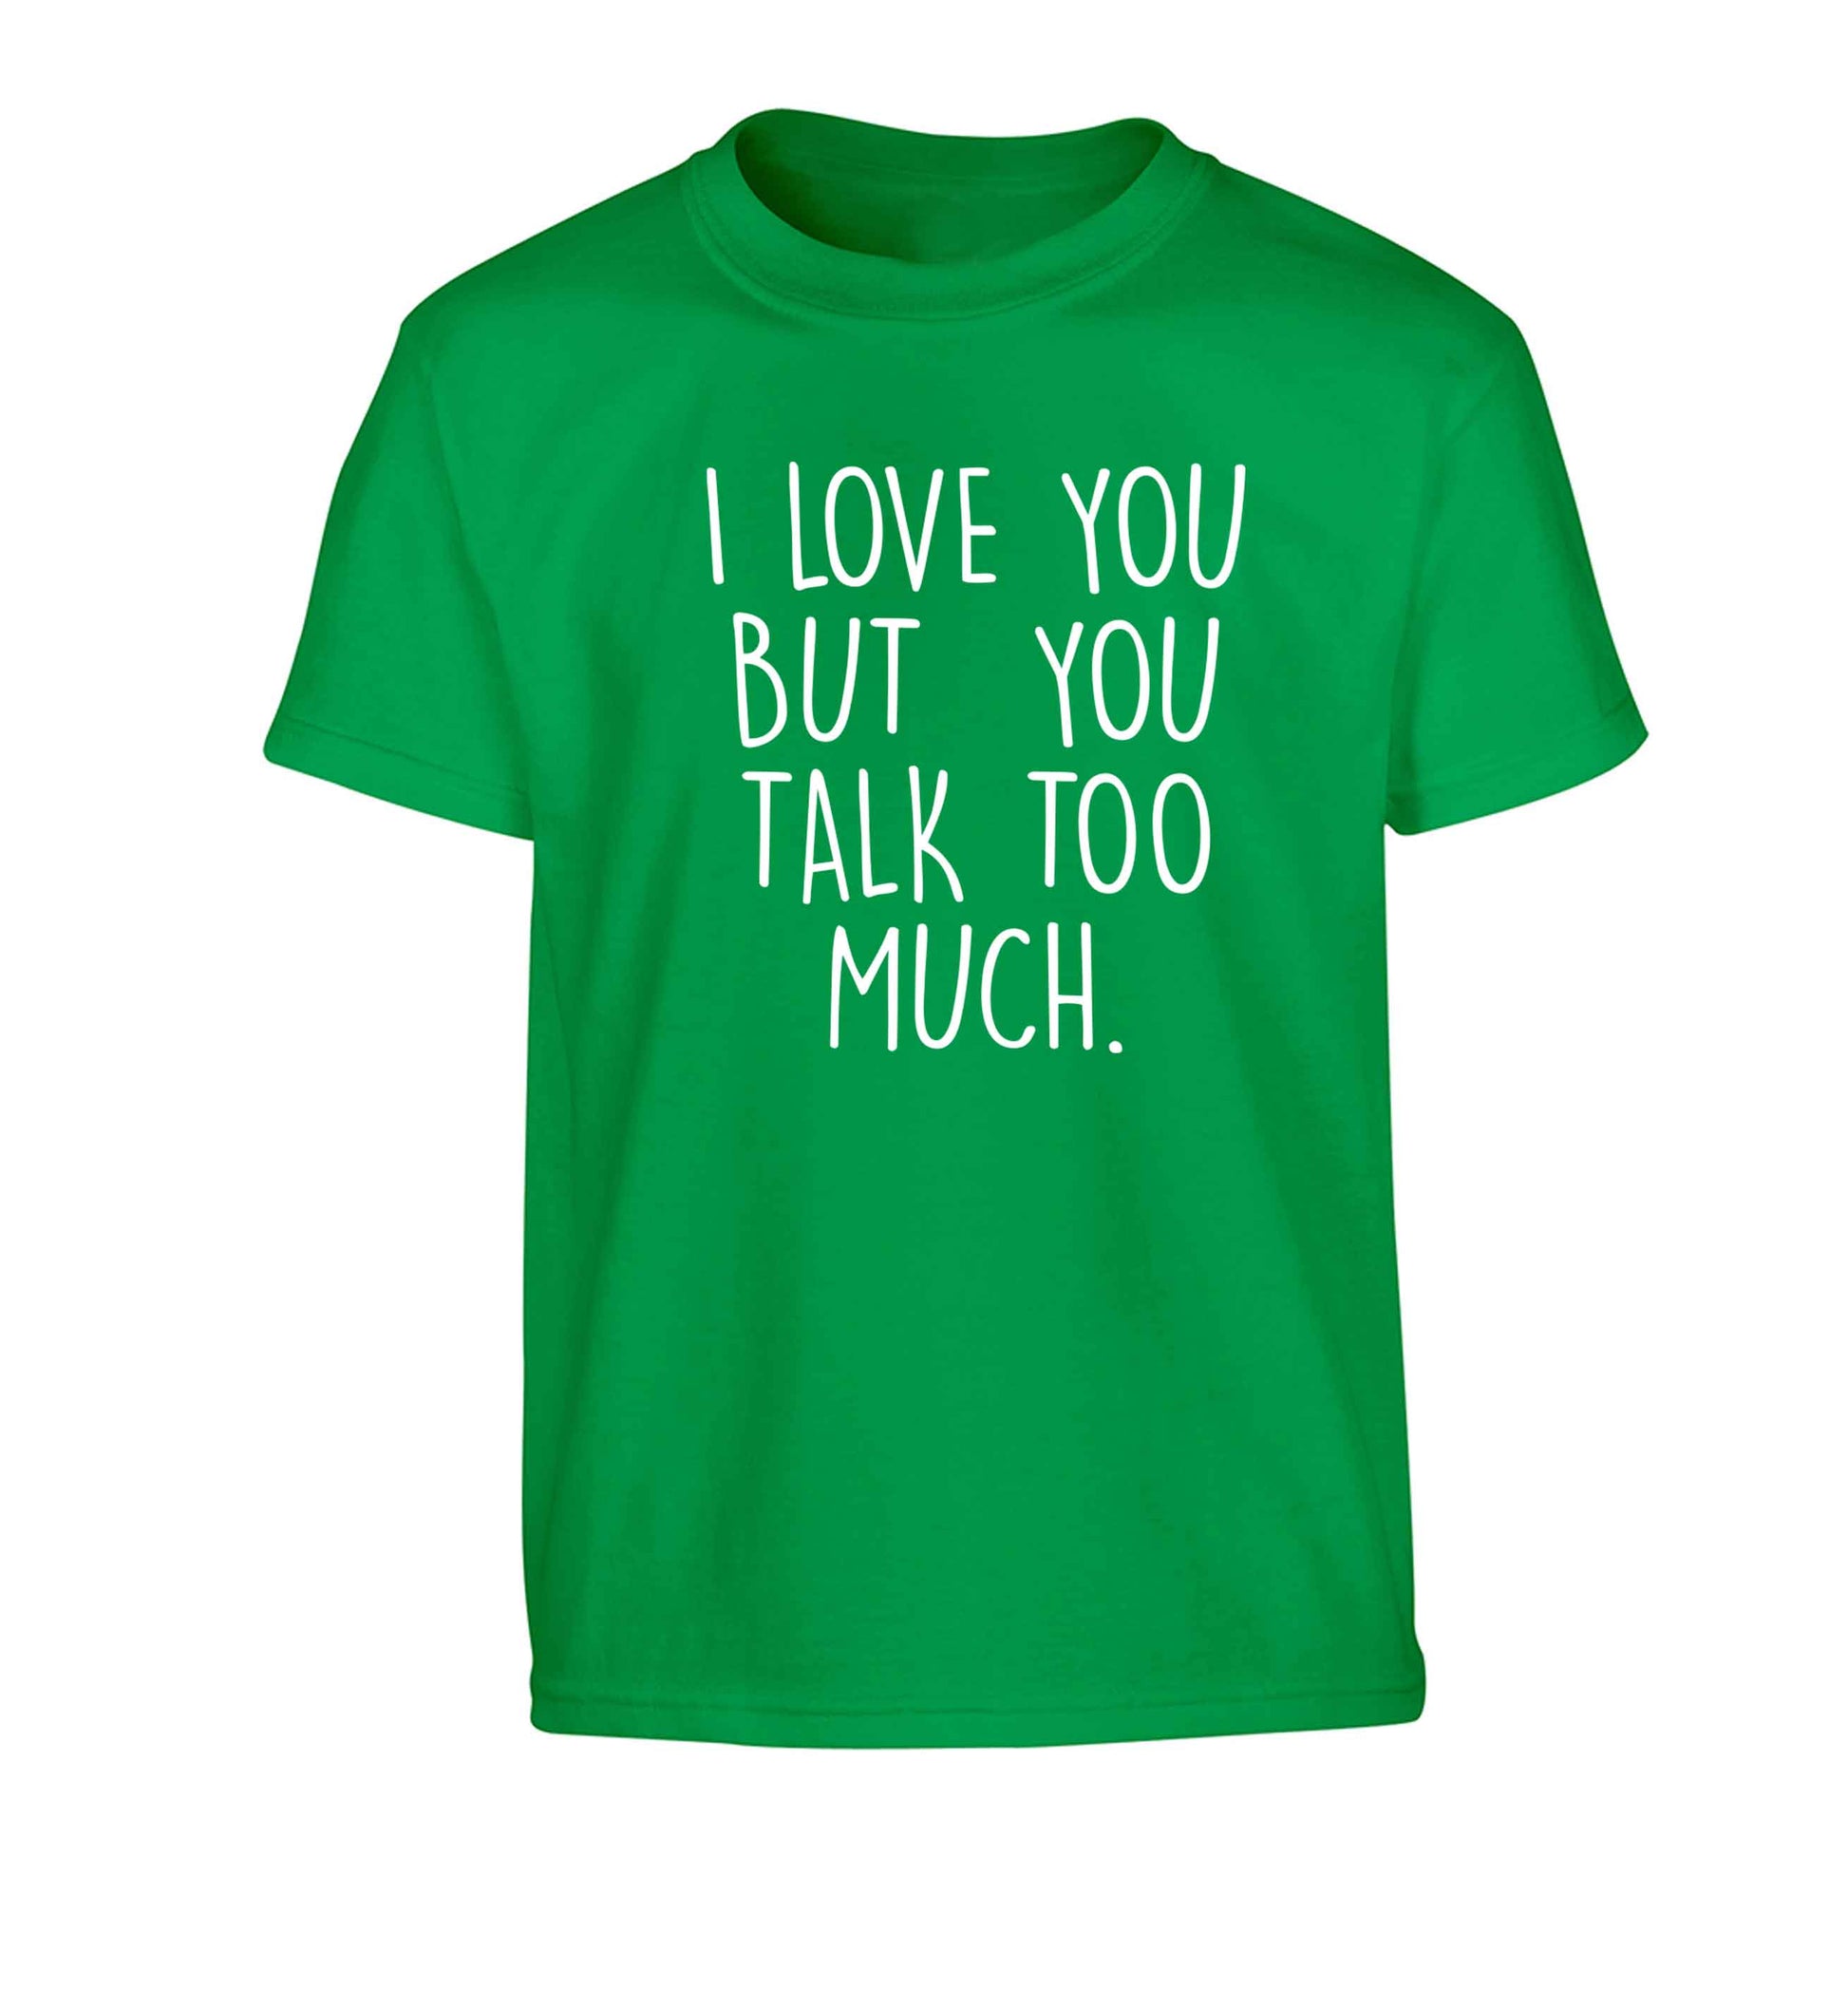 I love you but you talk too much Children's green Tshirt 12-13 Years